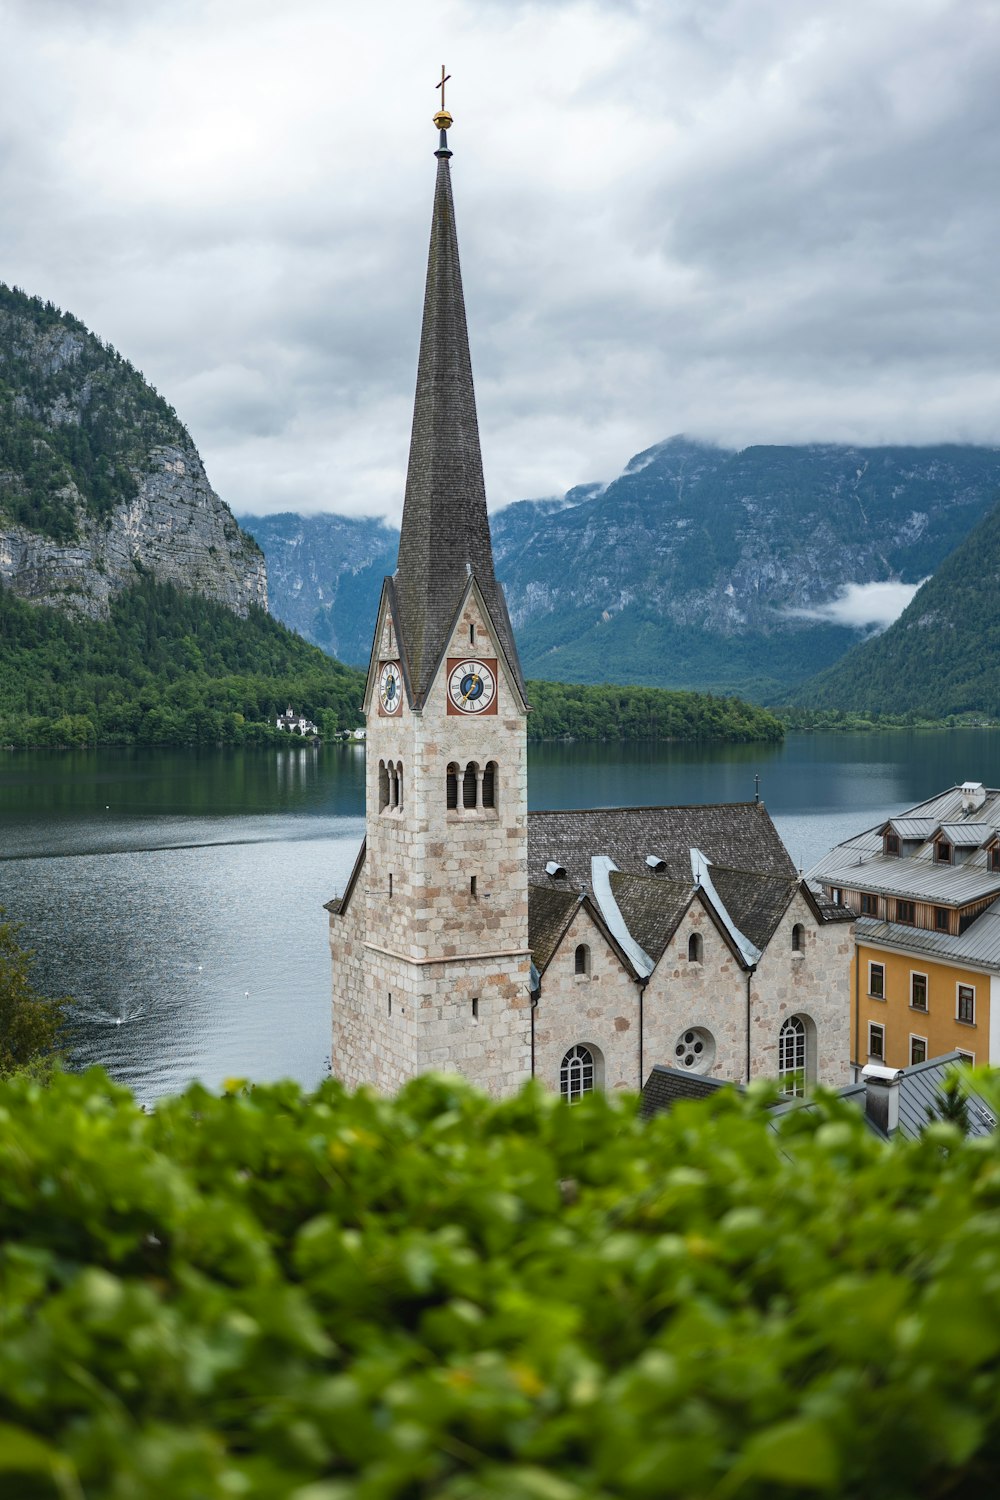 a church with a steeple next to a body of water